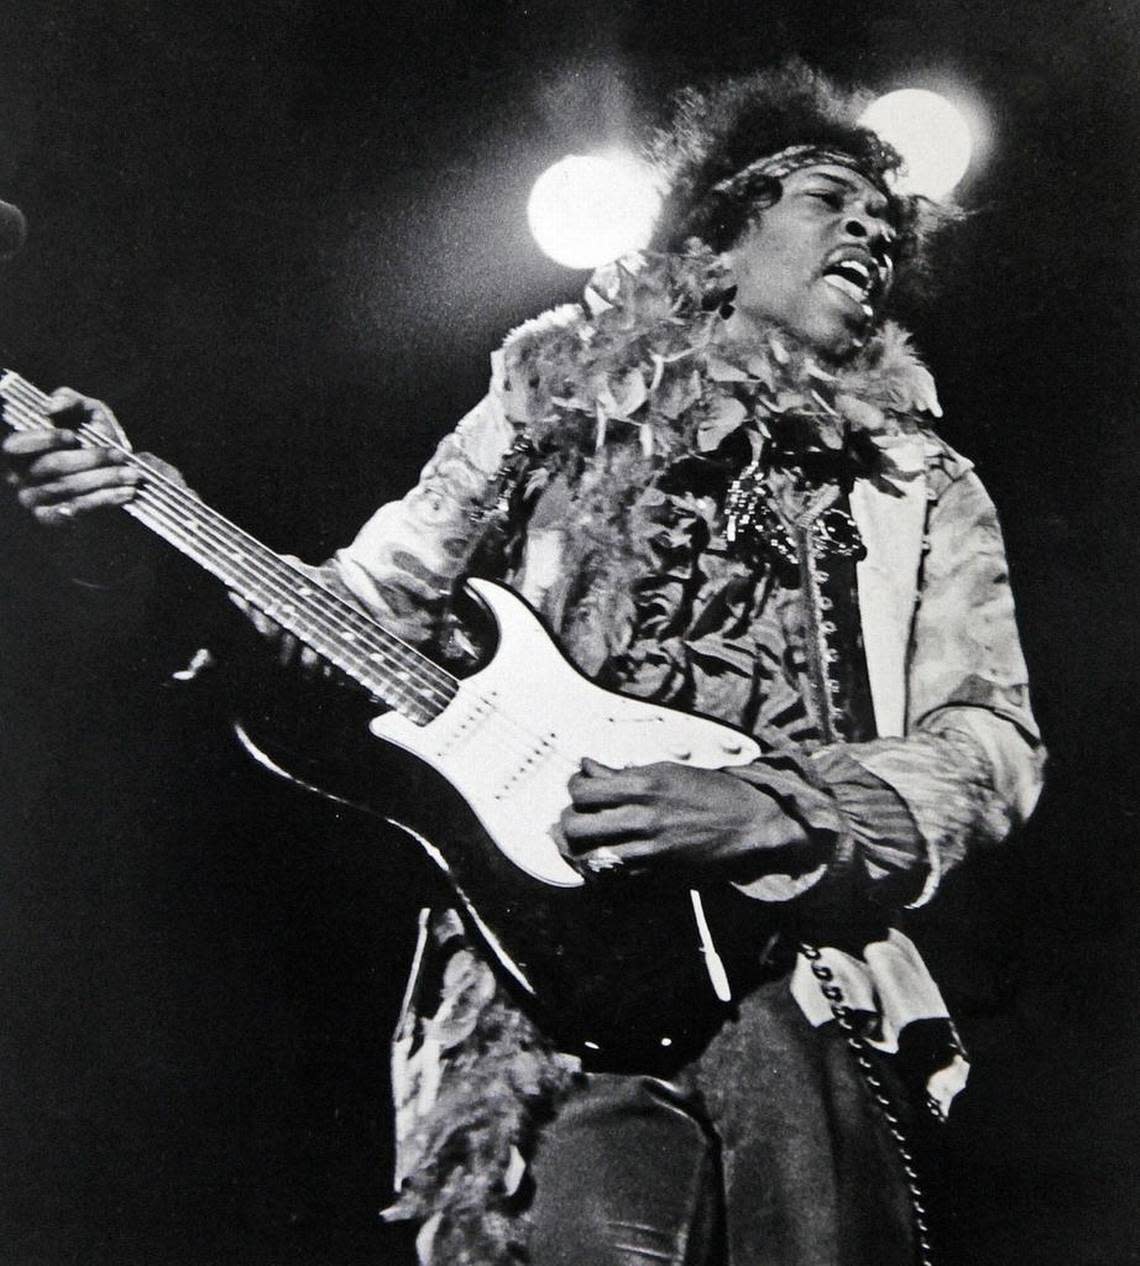 In this June 18, 1967 file photo, Jimi Hendrix performs at the Monterey Pop Festival in Monterey, Calif. Before Burning Man and Bonnaroo, Coachella and Lollapalooza, Glastonbury and Governors Island, there was Monterey Pop.